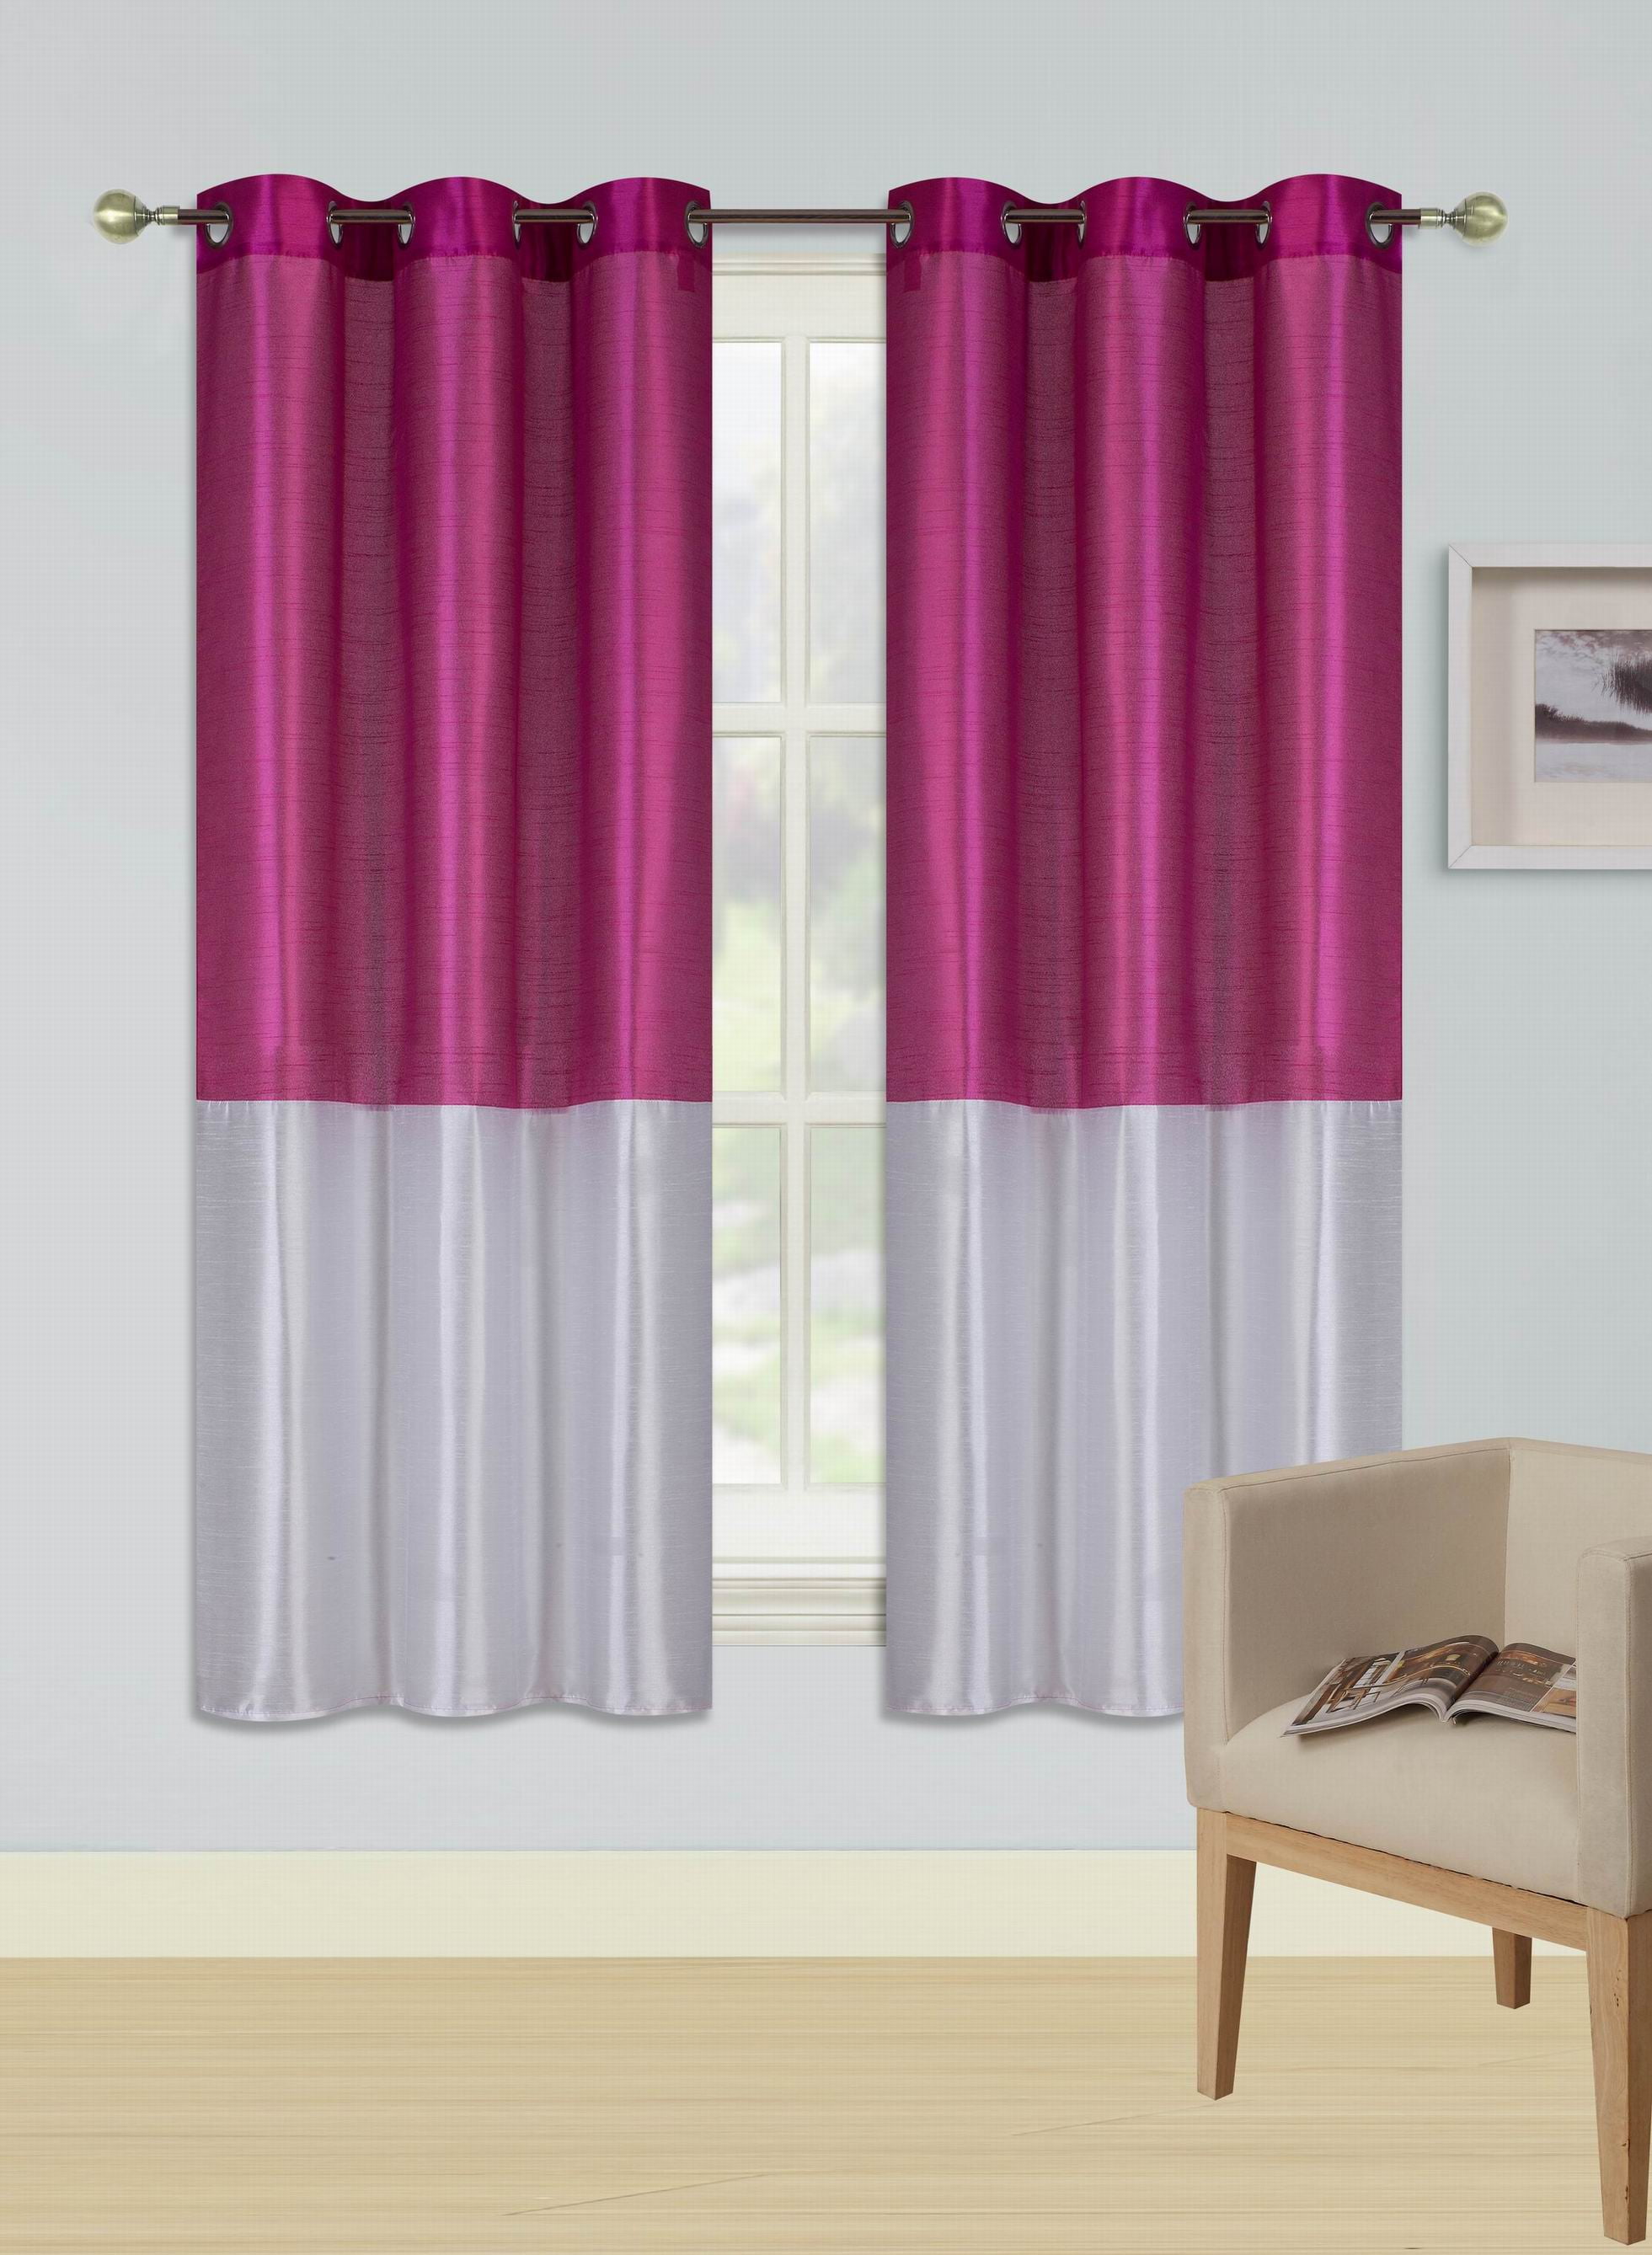 1PC New 2-TONE Window Curtain Grommet Panel Lined Blackout EID  HOT PINK WHITE 